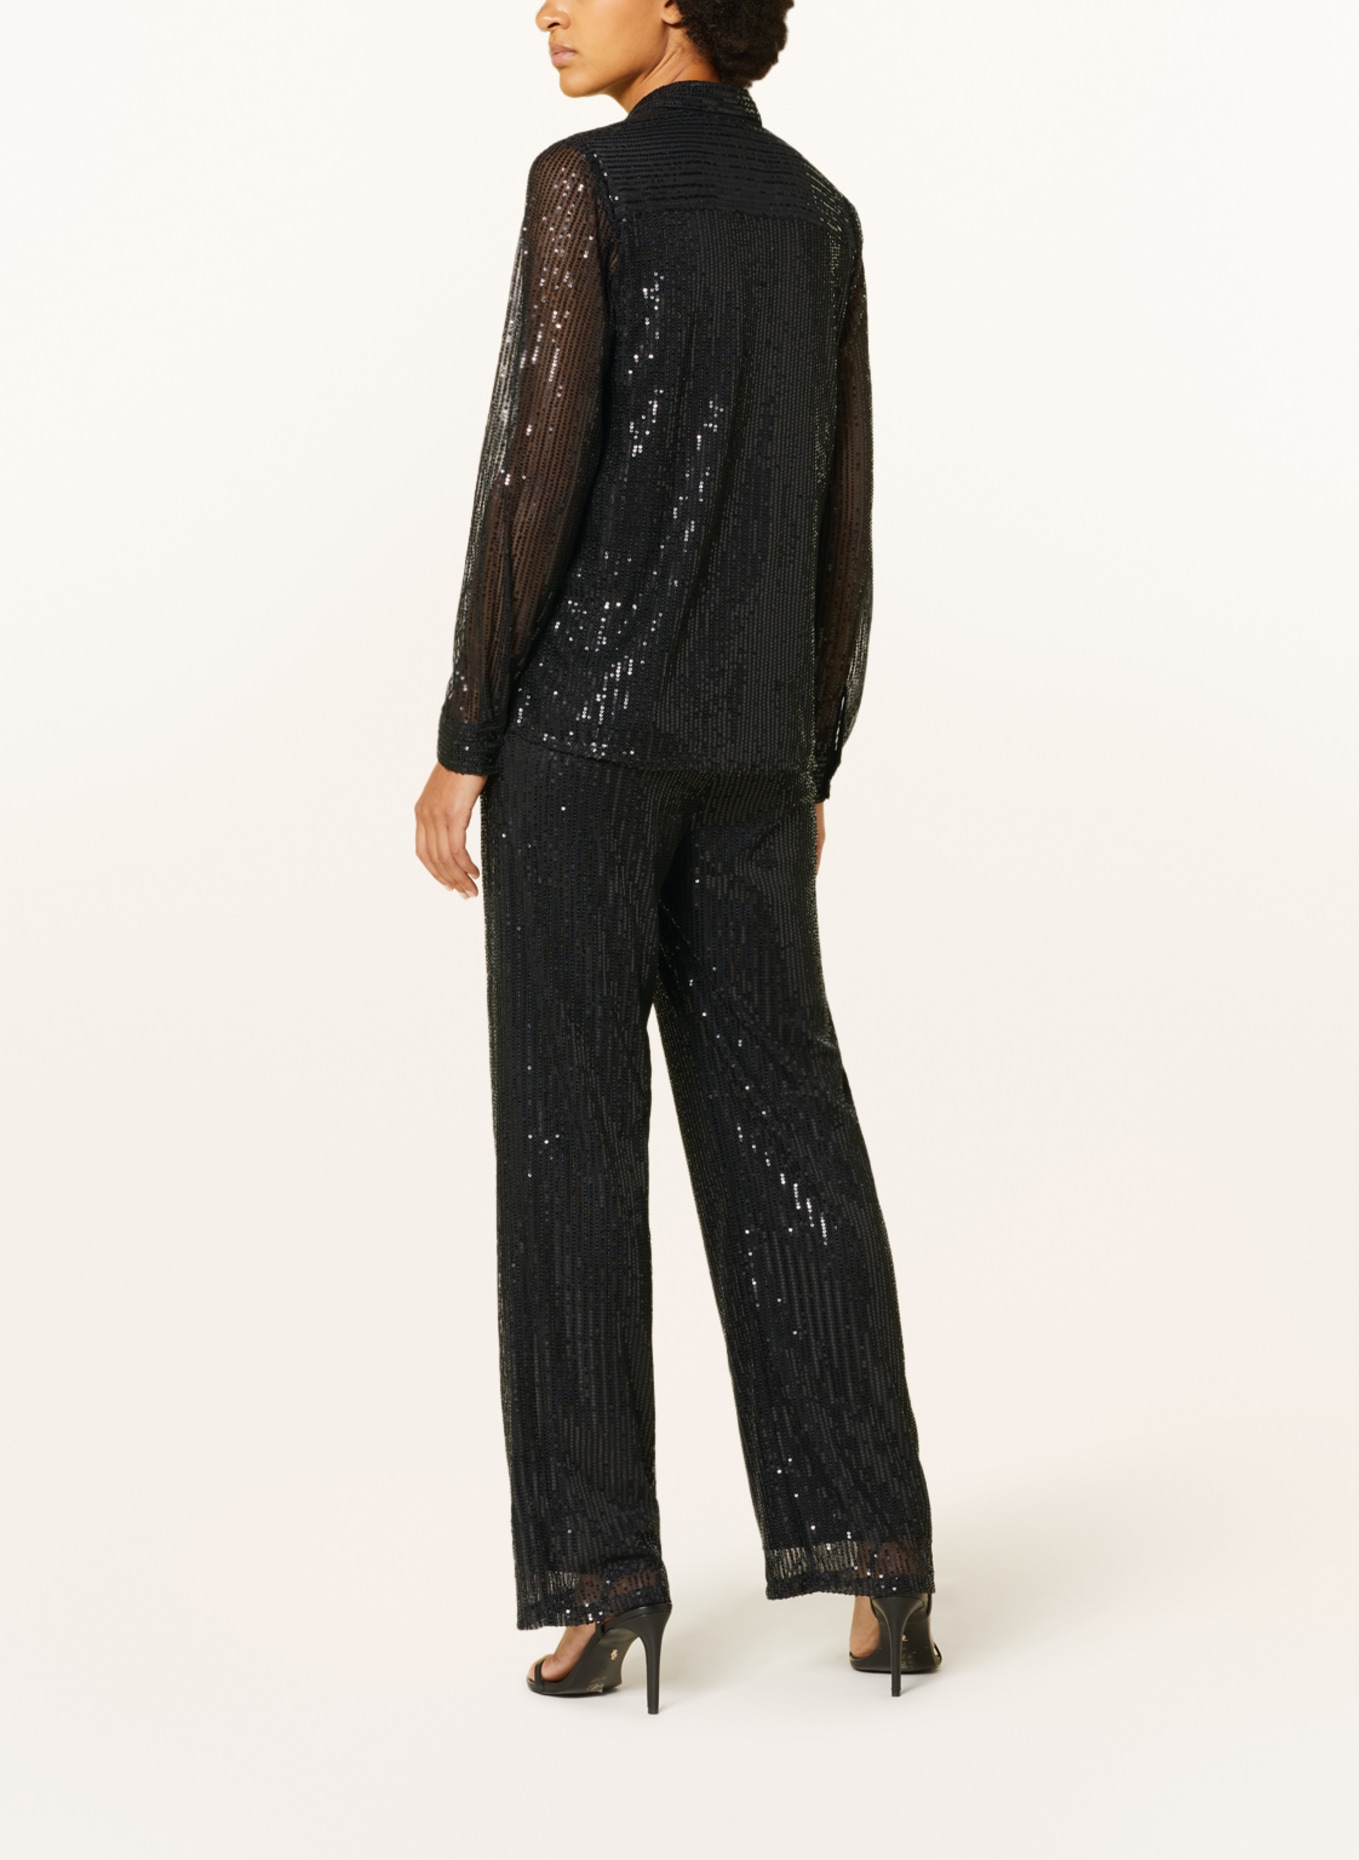 Princess GOES HOLLYWOOD Shirt blouse made of mesh with sequins, Color: BLACK (Image 3)